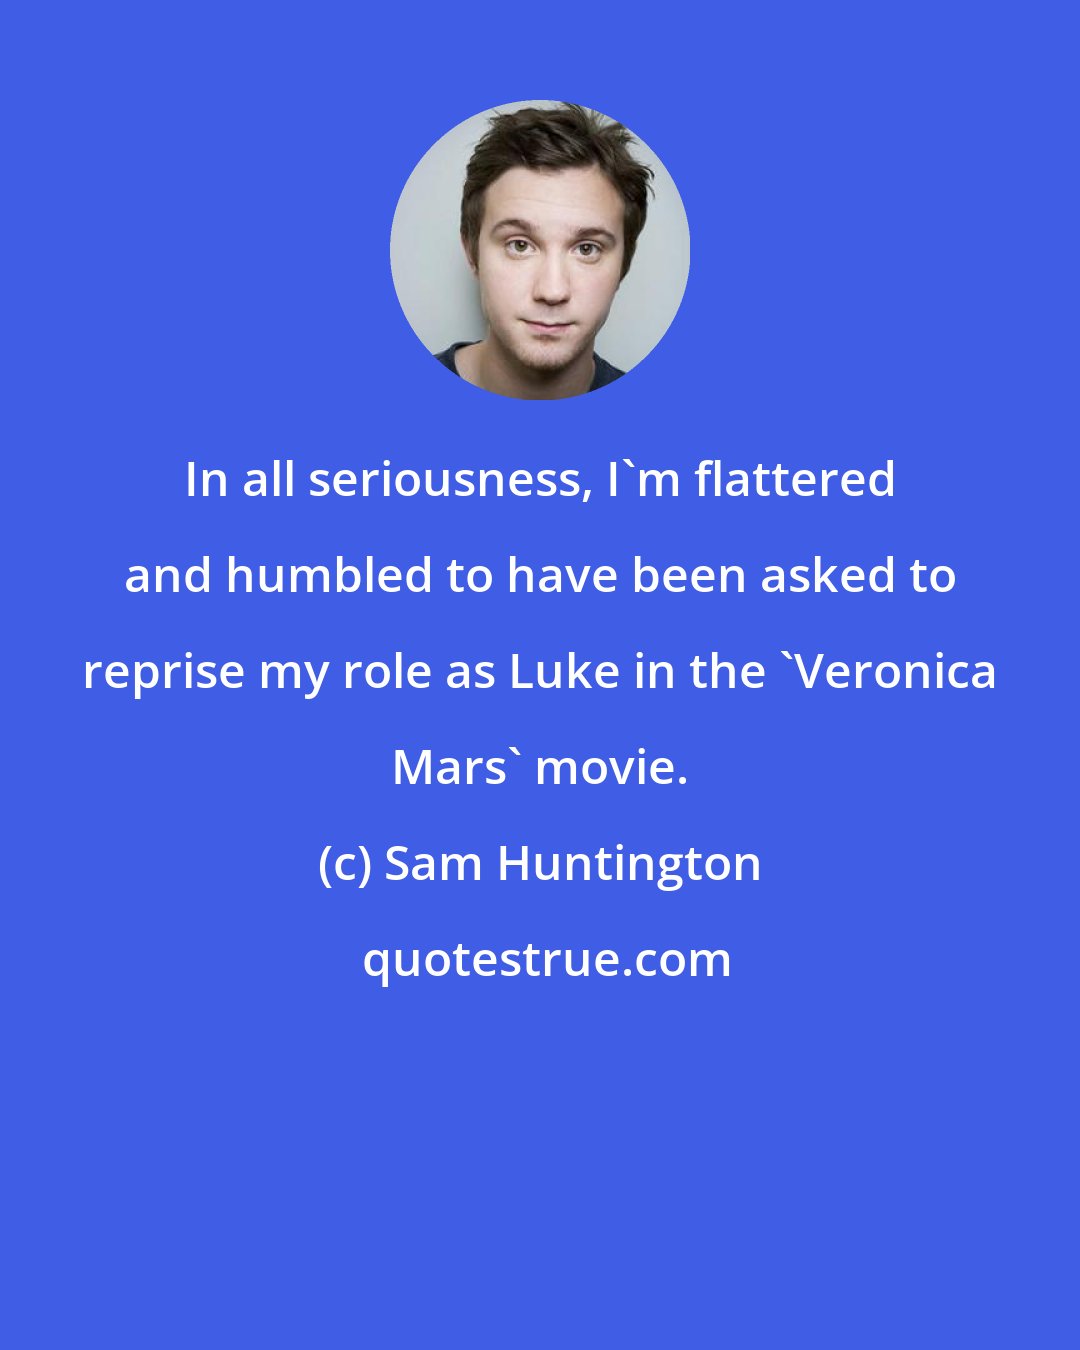 Sam Huntington: In all seriousness, I'm flattered and humbled to have been asked to reprise my role as Luke in the 'Veronica Mars' movie.